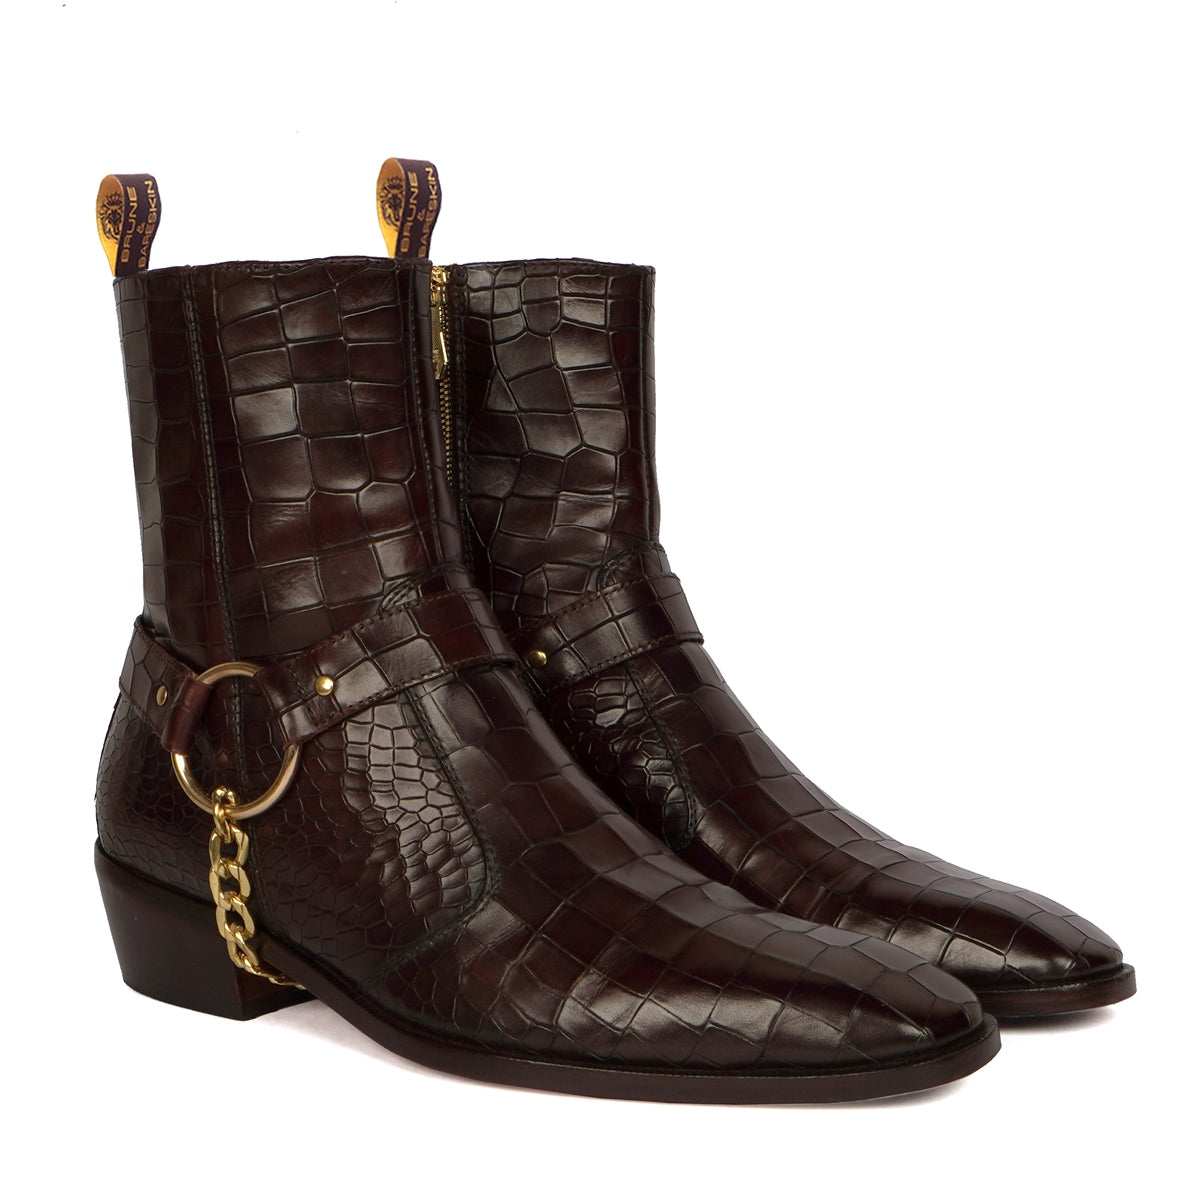 Dark Brown High Ankle Hand Made Side Zip Leather Boots With Stylish Golden Chain